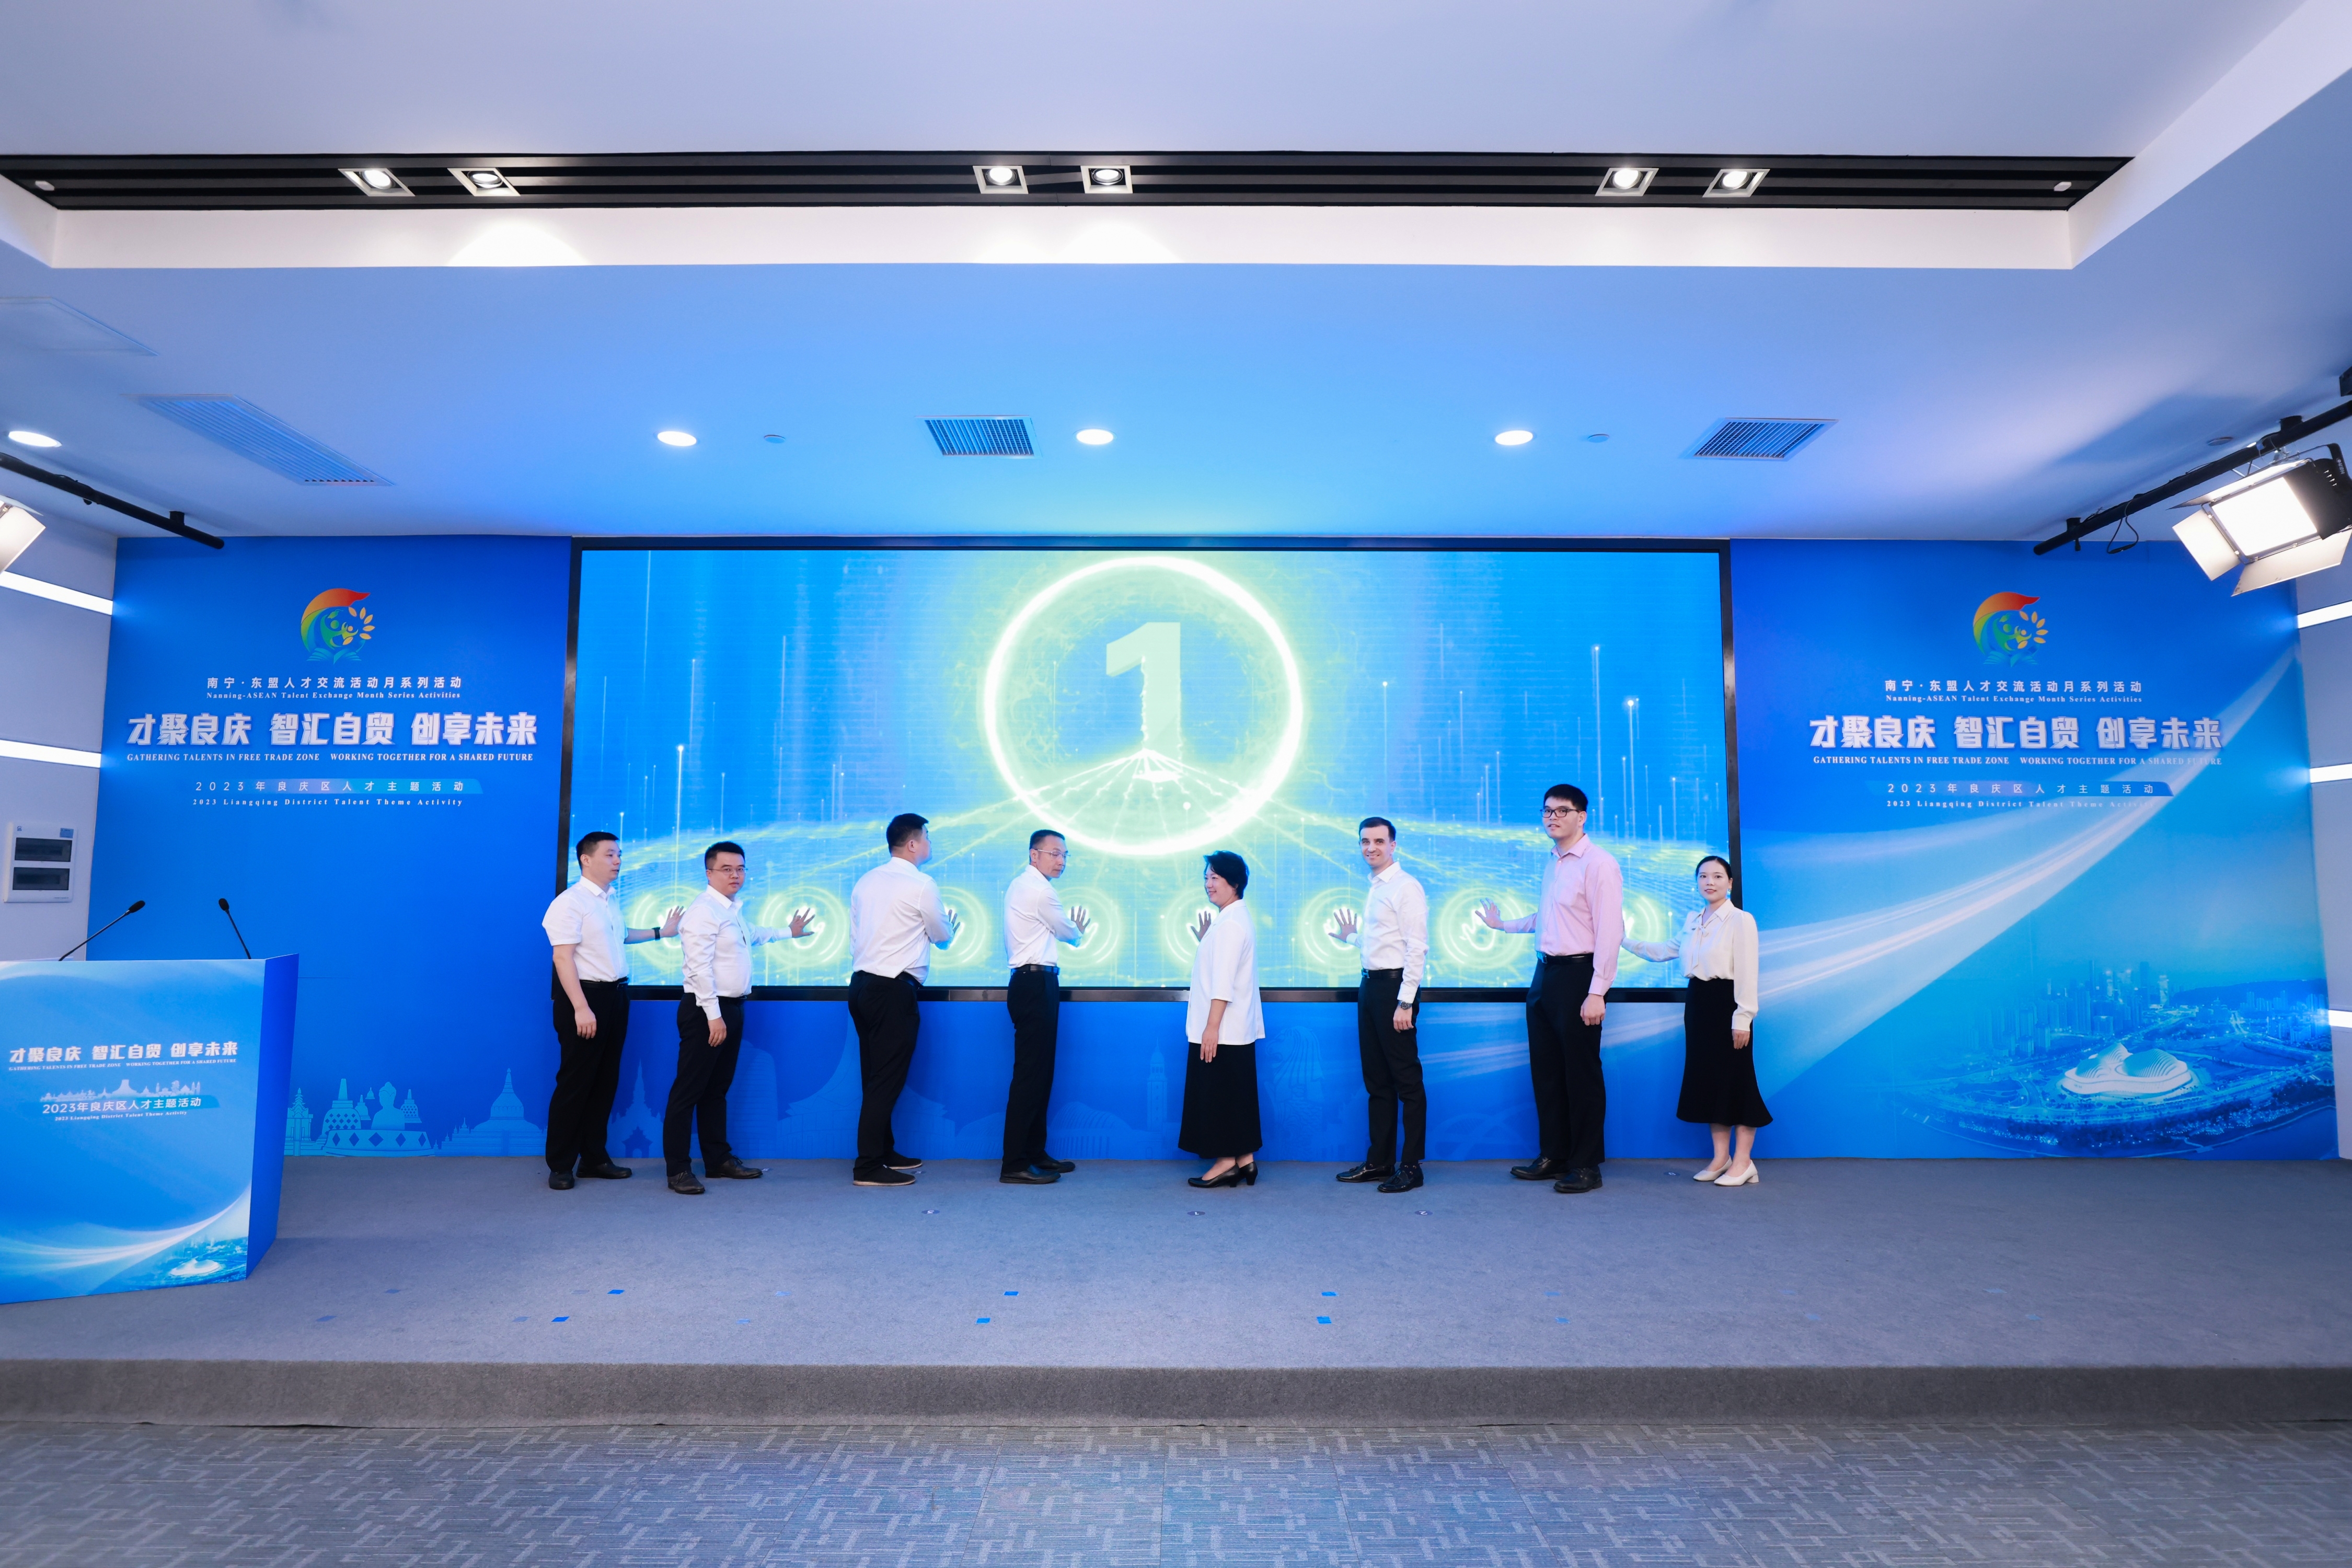 The China-ASEAN New Smart City Collaborative Innovation Centre was launched by honorable guests from the Liangqing Urban District Party Committee, the Party Leadership Group of Nanning Science and Technology Bureau and relevant experts from the ASEAN countries. 